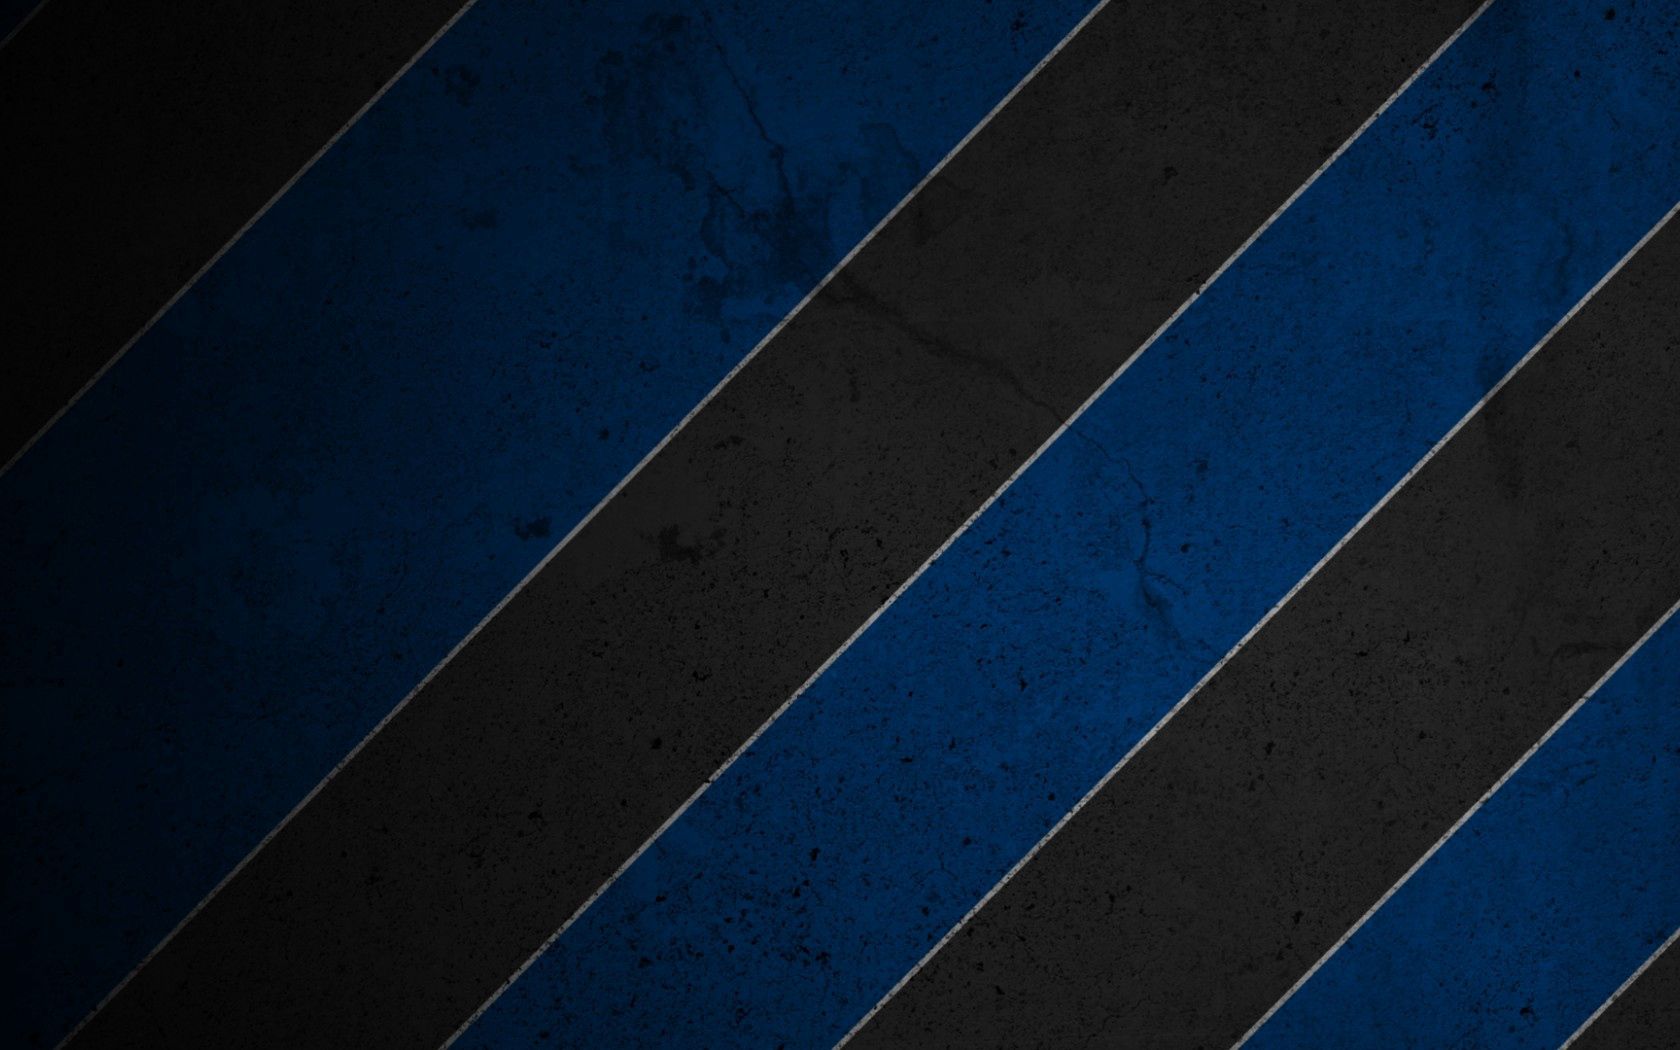 155049 download wallpaper stripes, texture, black, white, blue, textures, streaks screensavers and pictures for free